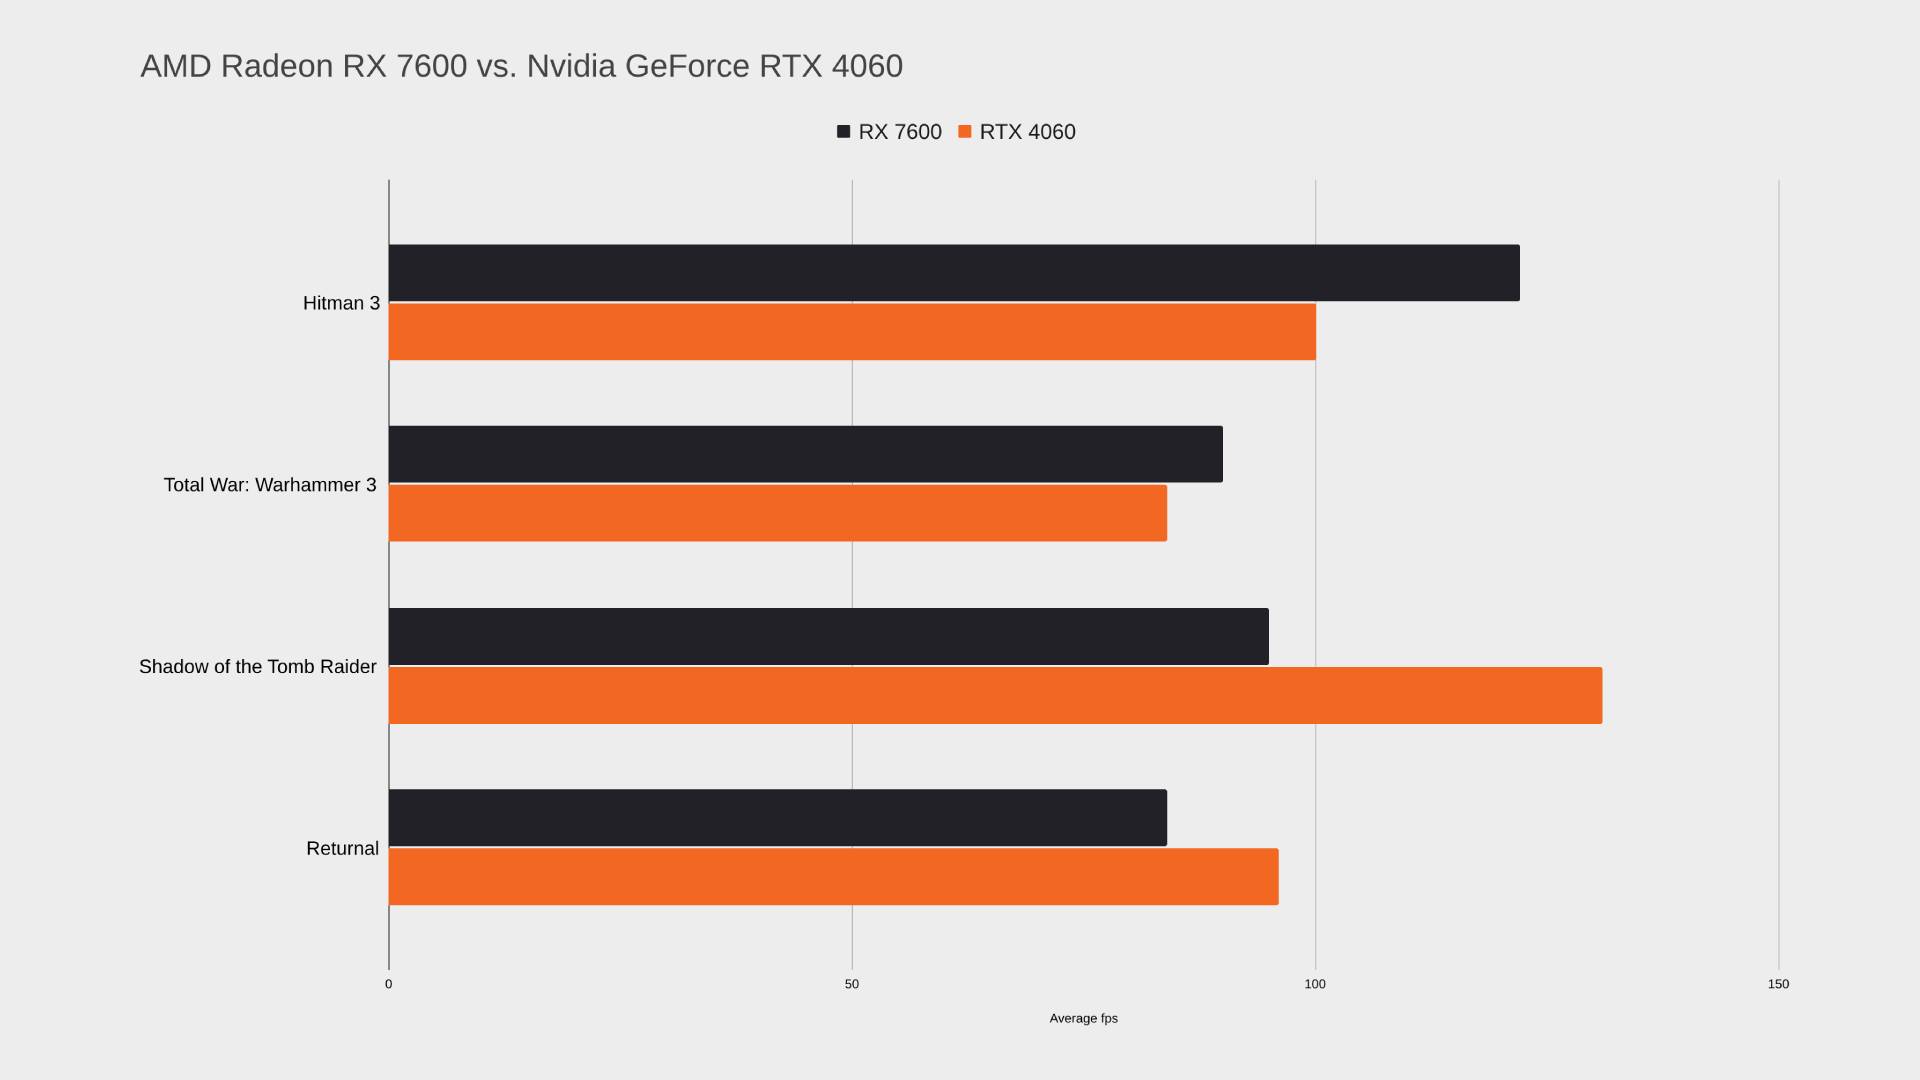 Bar graph with benchmarks for RX 7600 and RTX 4060 graphics cards in orange and black